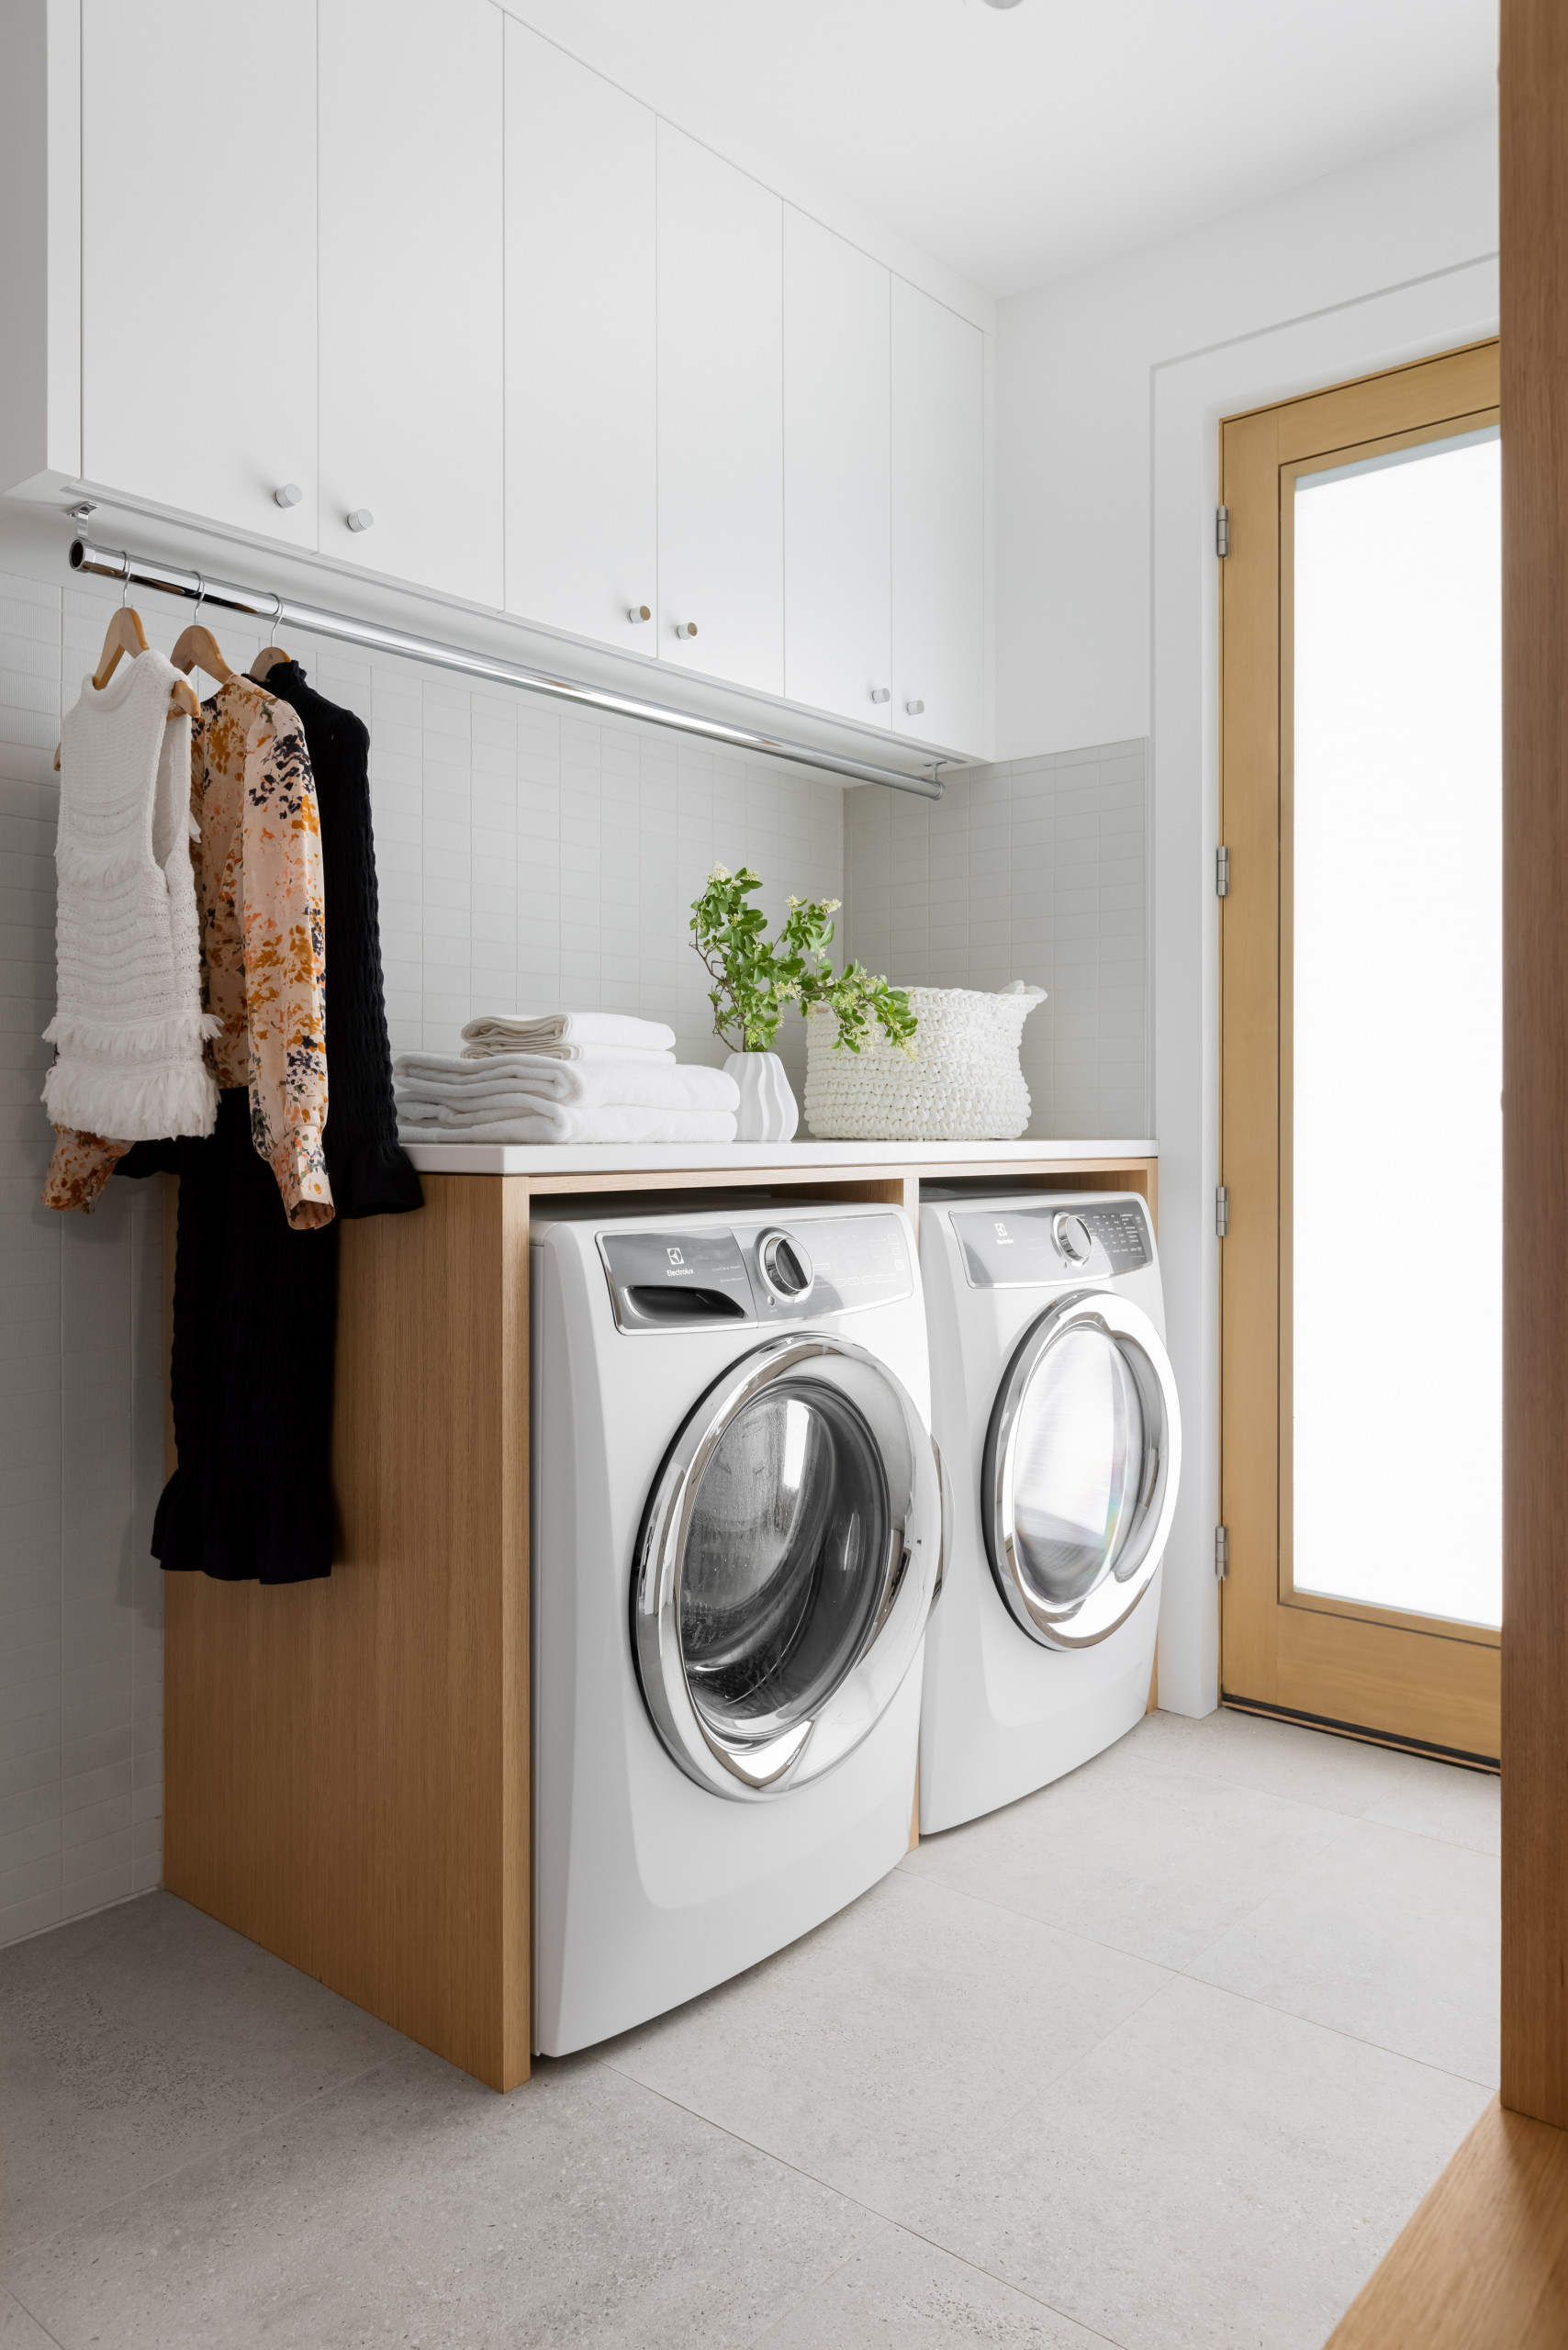 Laundry Room Storage Solutions: Creative Organizers for a Small